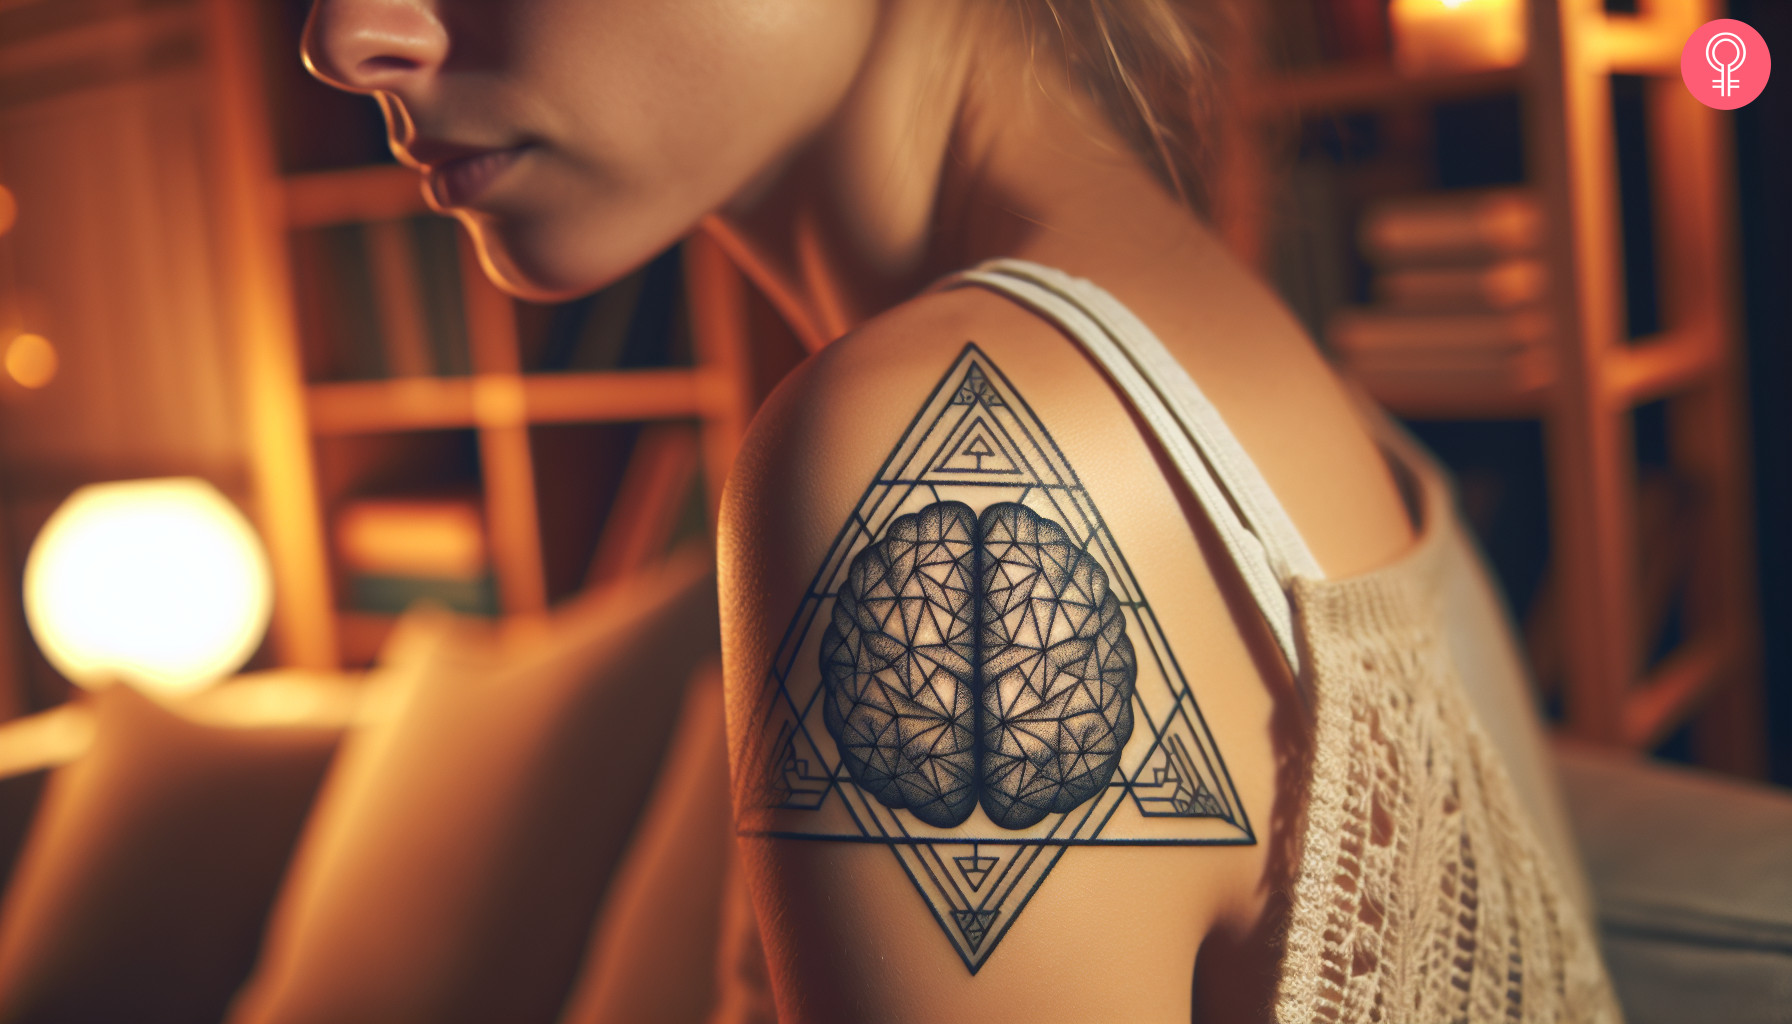 A tattoo on the shoulder showing a geometric brain